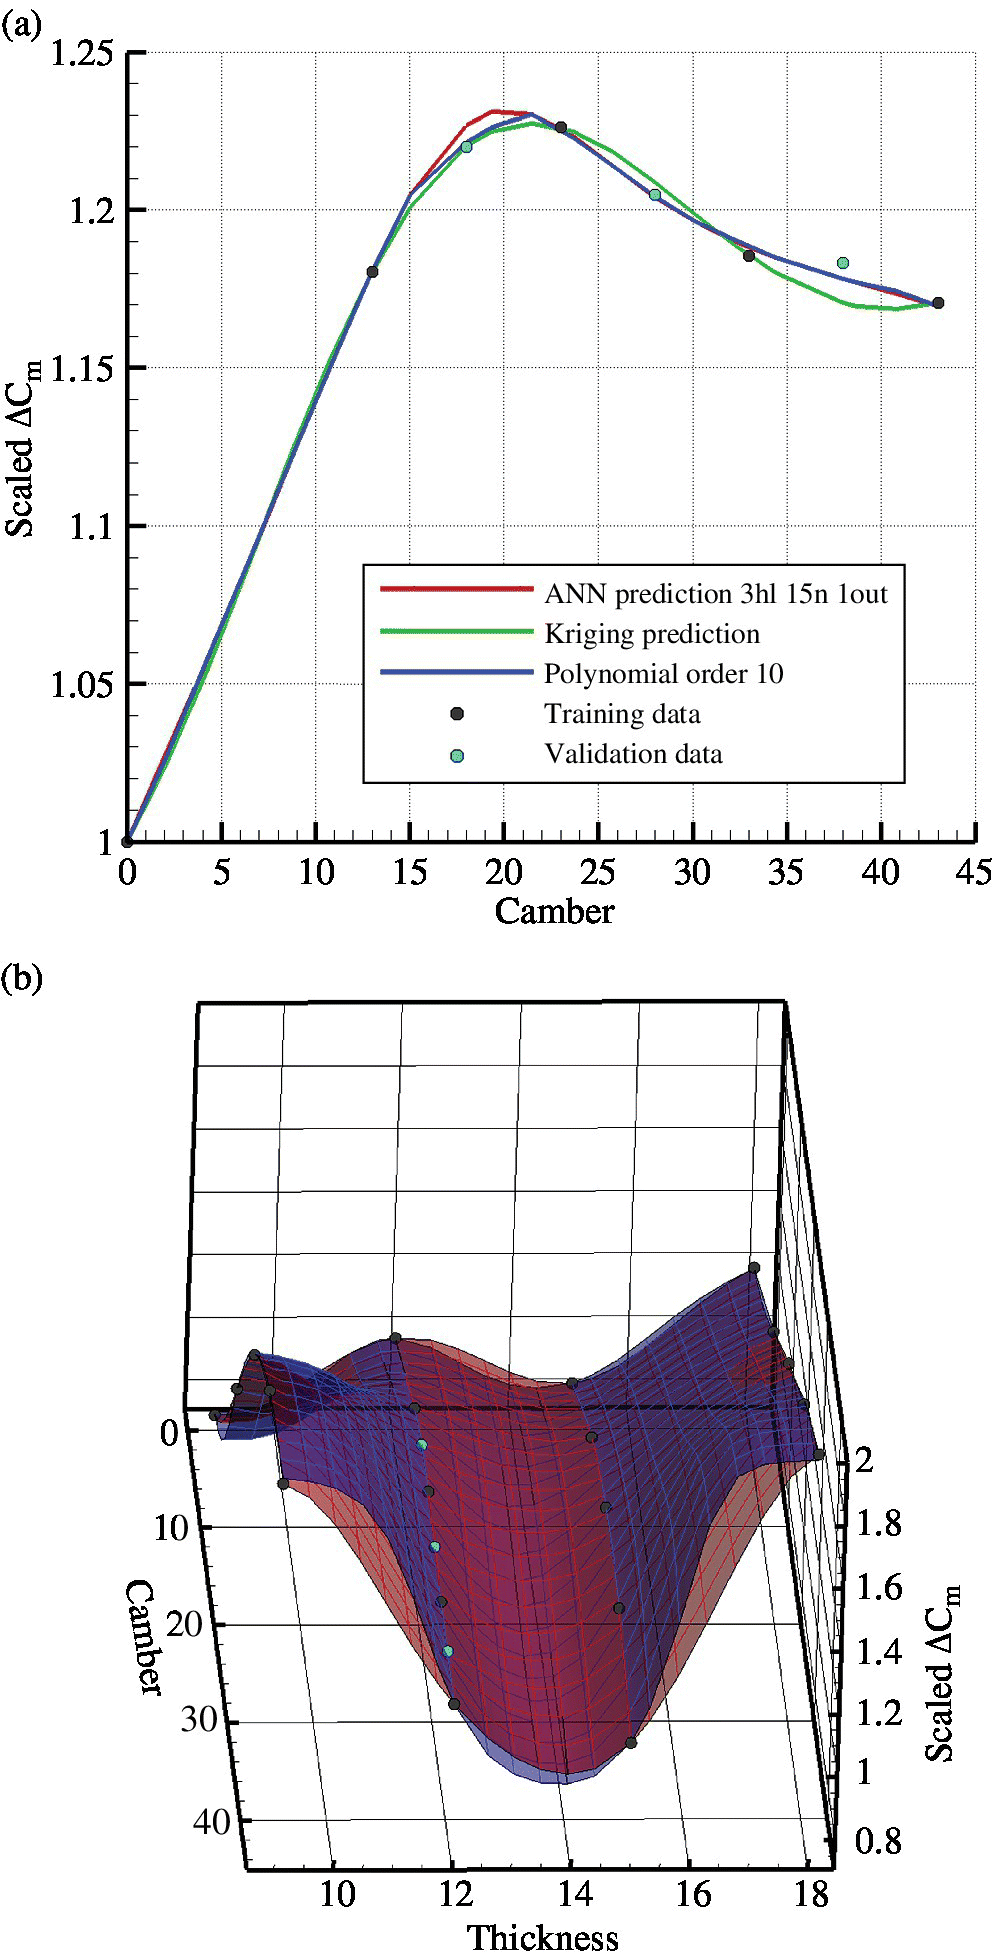 Top: Graph of scaled Δ Cm over camber. Bottom: 3D Graph of scaled Δ Cm and camber over thickness.